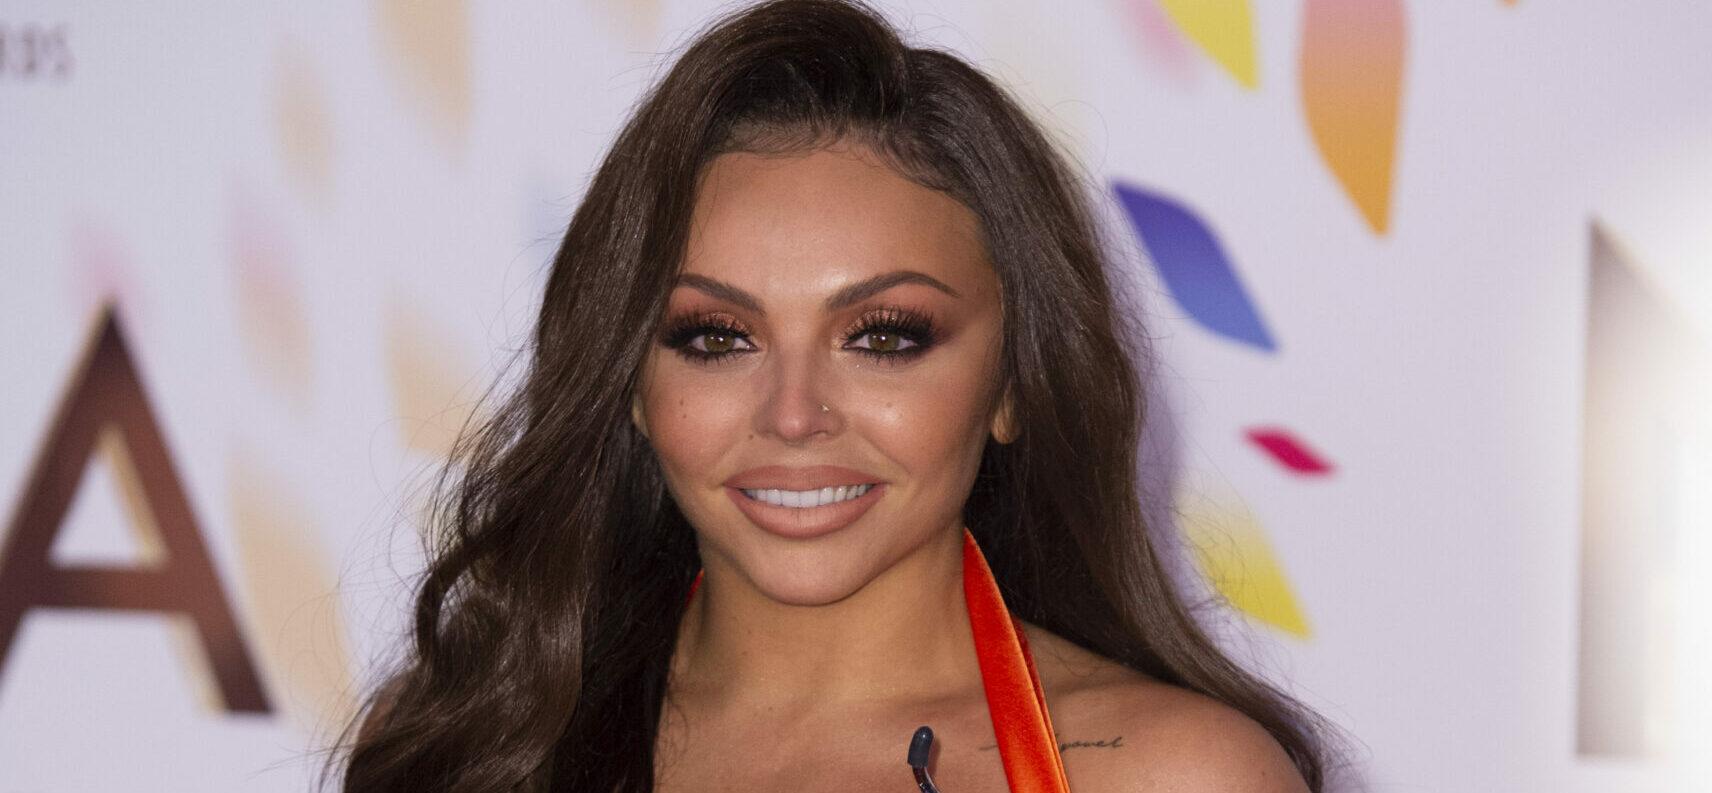 Jesy Nelson Cleans House To Relaunch Disastrous Solo Career